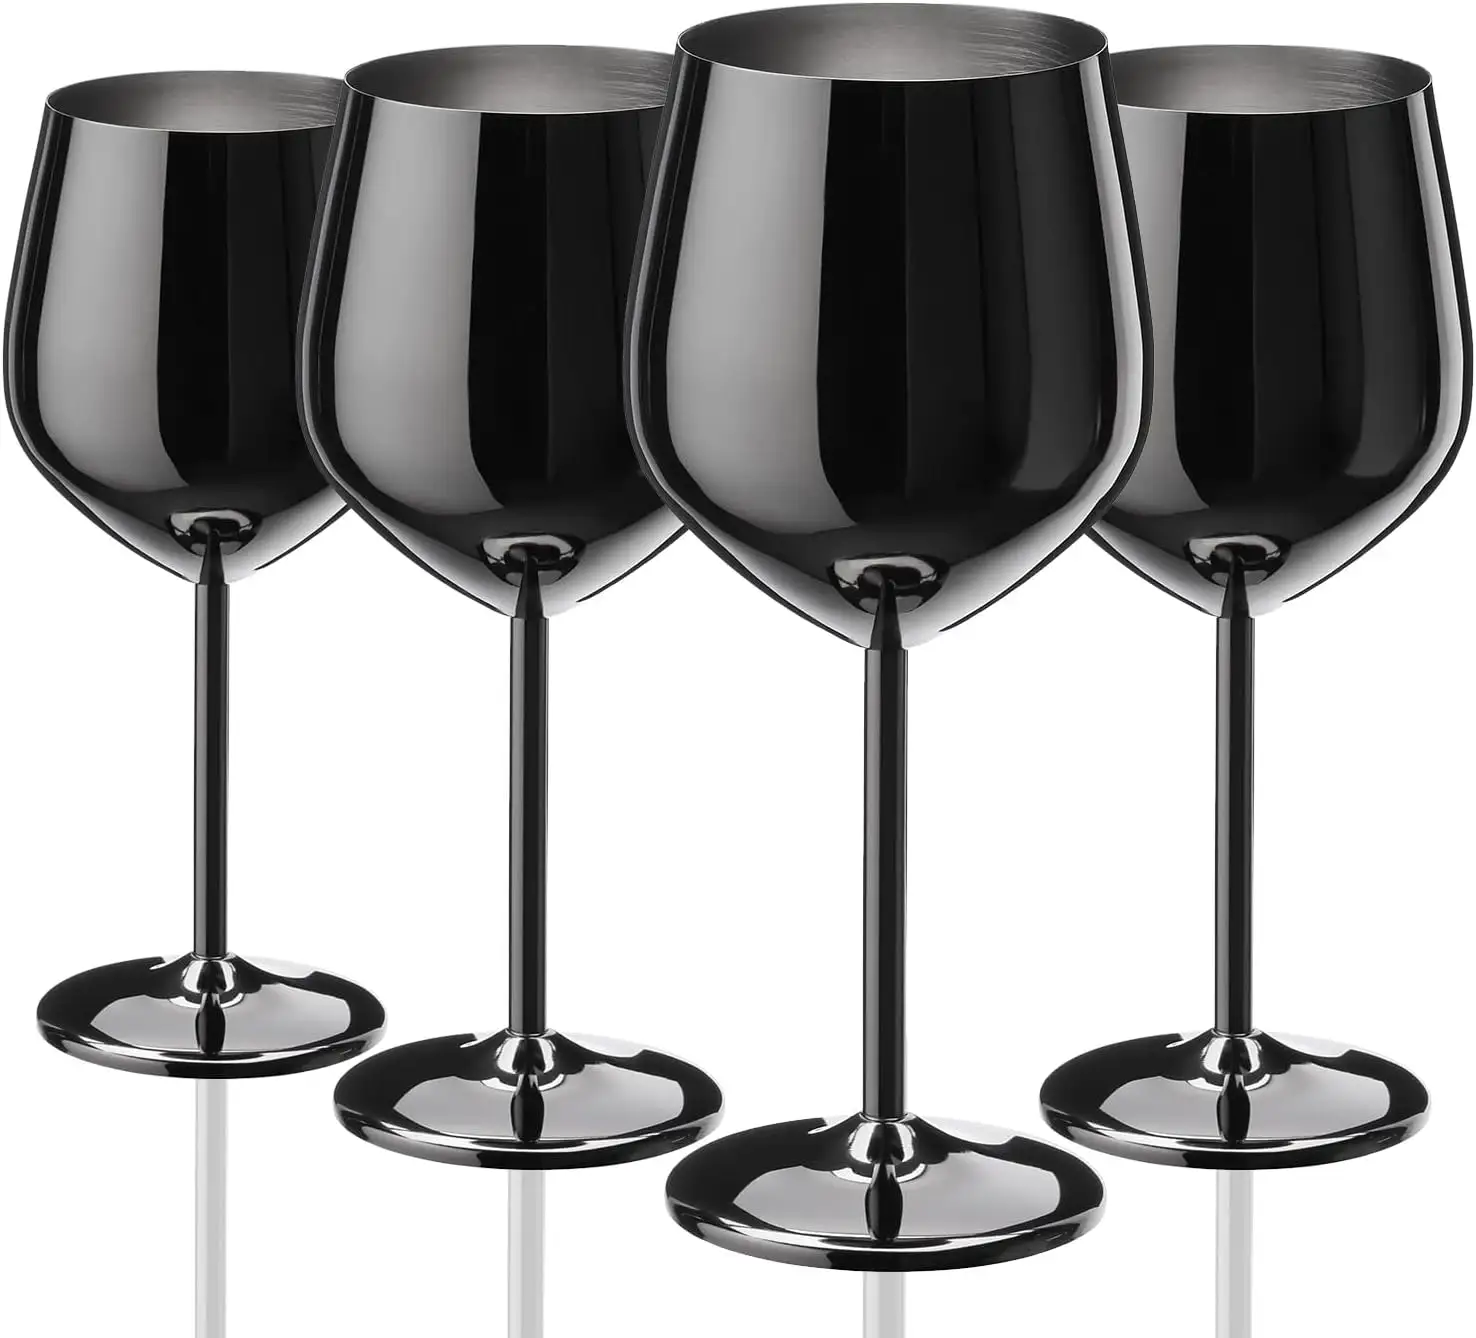 Direct Factory Stainless Steel Wine Glasses Stem Unbreakable Black Wine Goblets Metal Outdoor Pool Party Barware Supplies